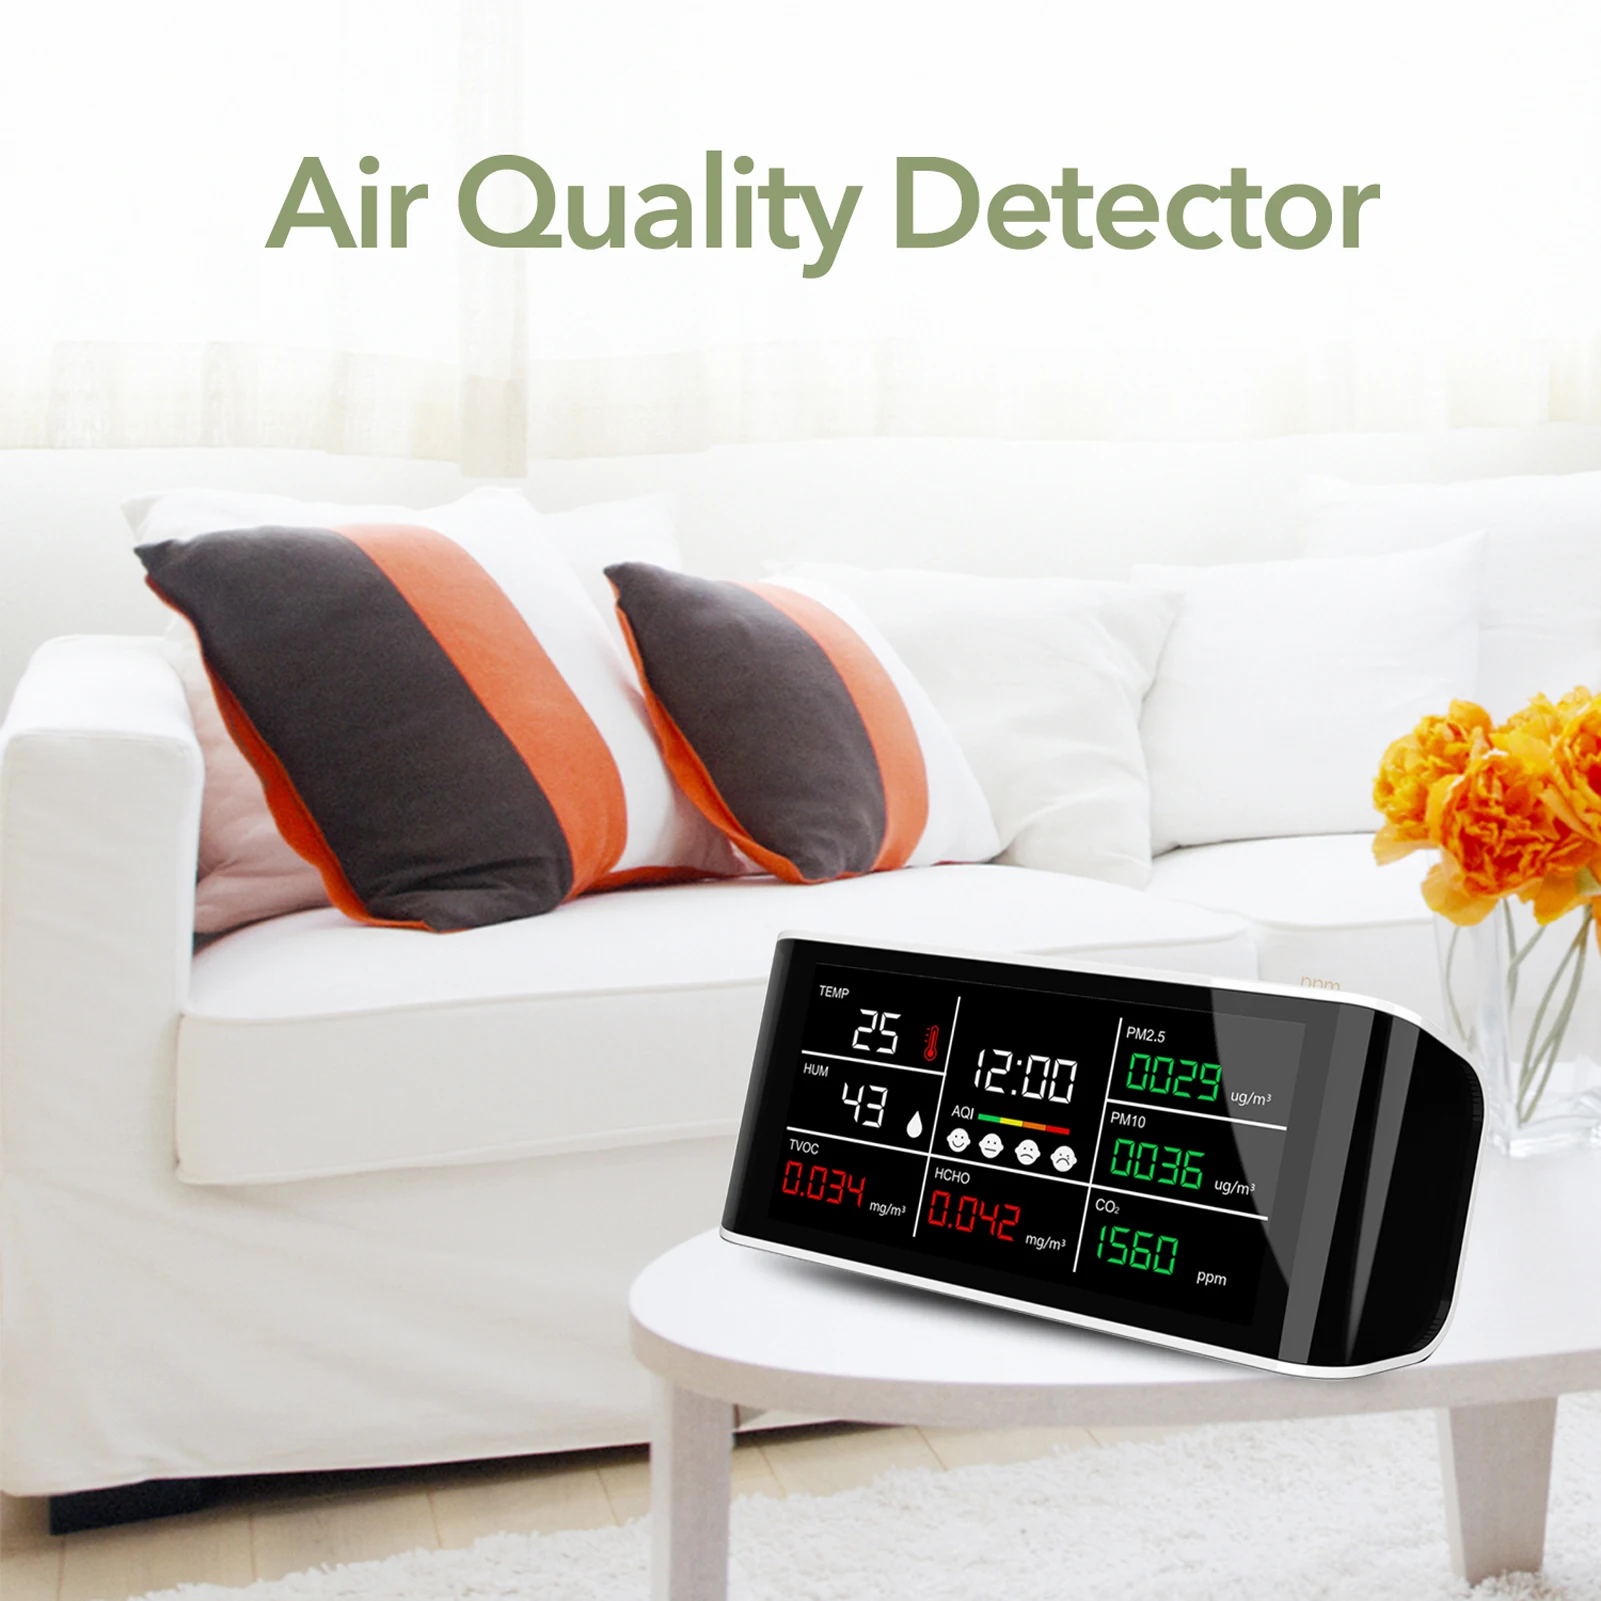 

DM69 Portable CO2 Meter PM2.5 PM10 HCHO TOVC Temperature Humidity Infrared NDIR Detector Multifunctional Air Quality Analyzer